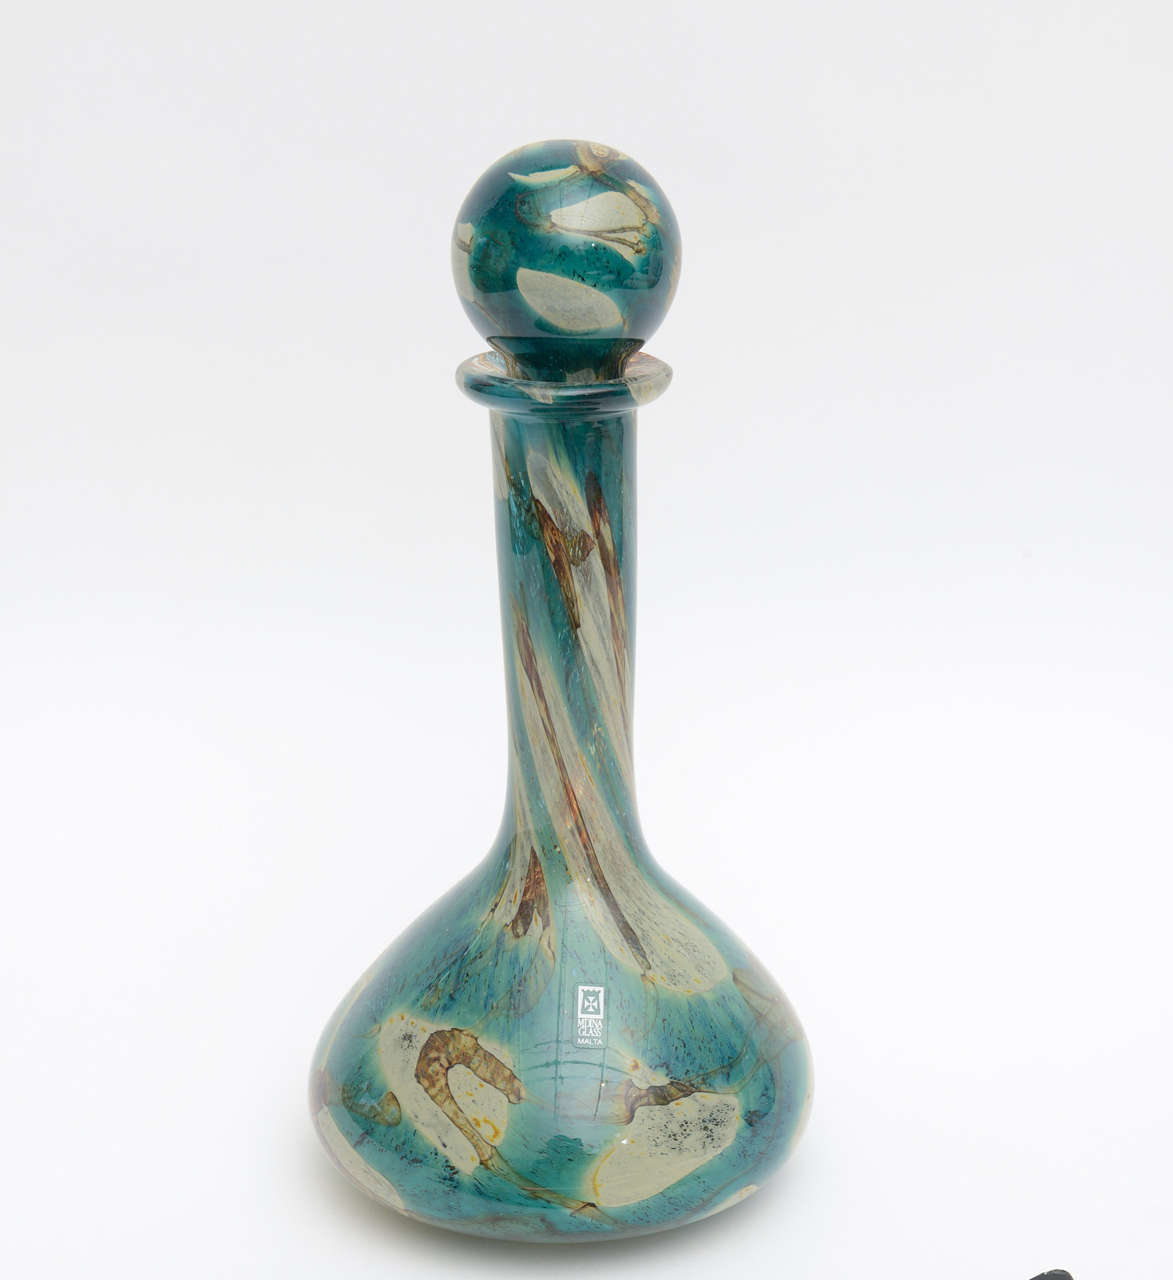 The Malta region of this decanter glass bottle represents the topography of land and sea and earth and forms. It is signed Mdina.